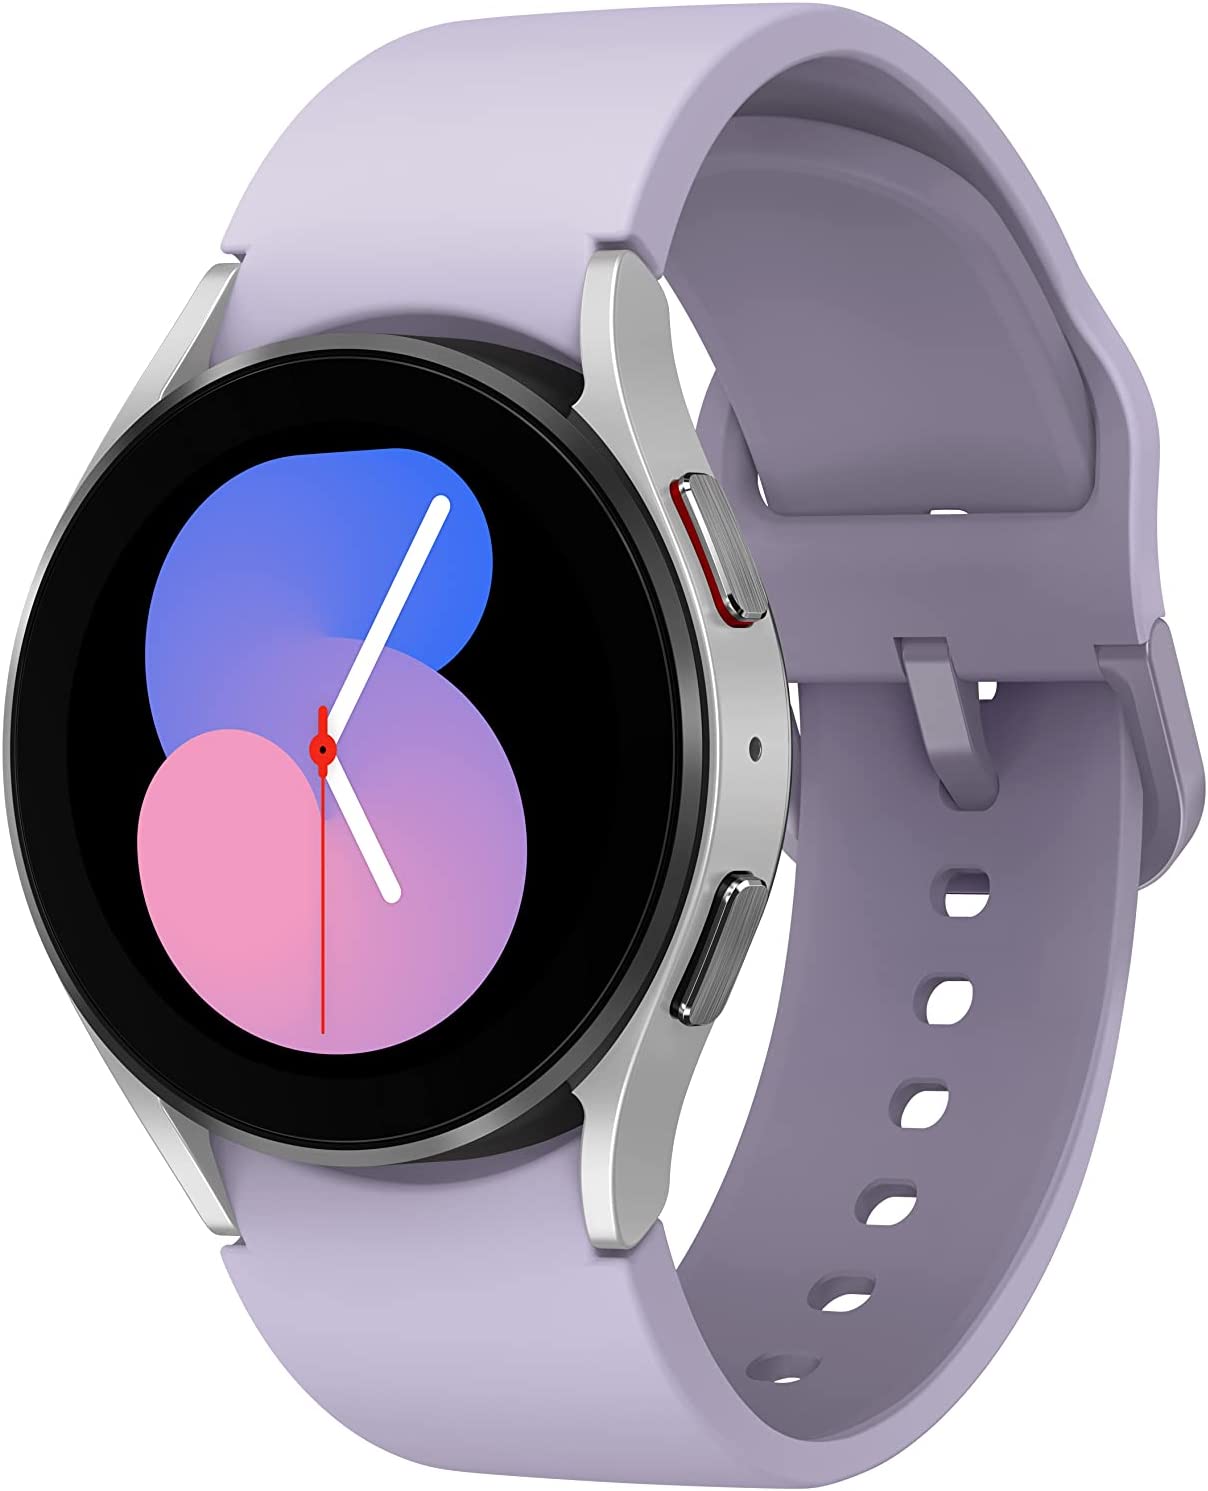 Samsung Galaxy Watch 5 (40mm) (LTE) Full Specifications